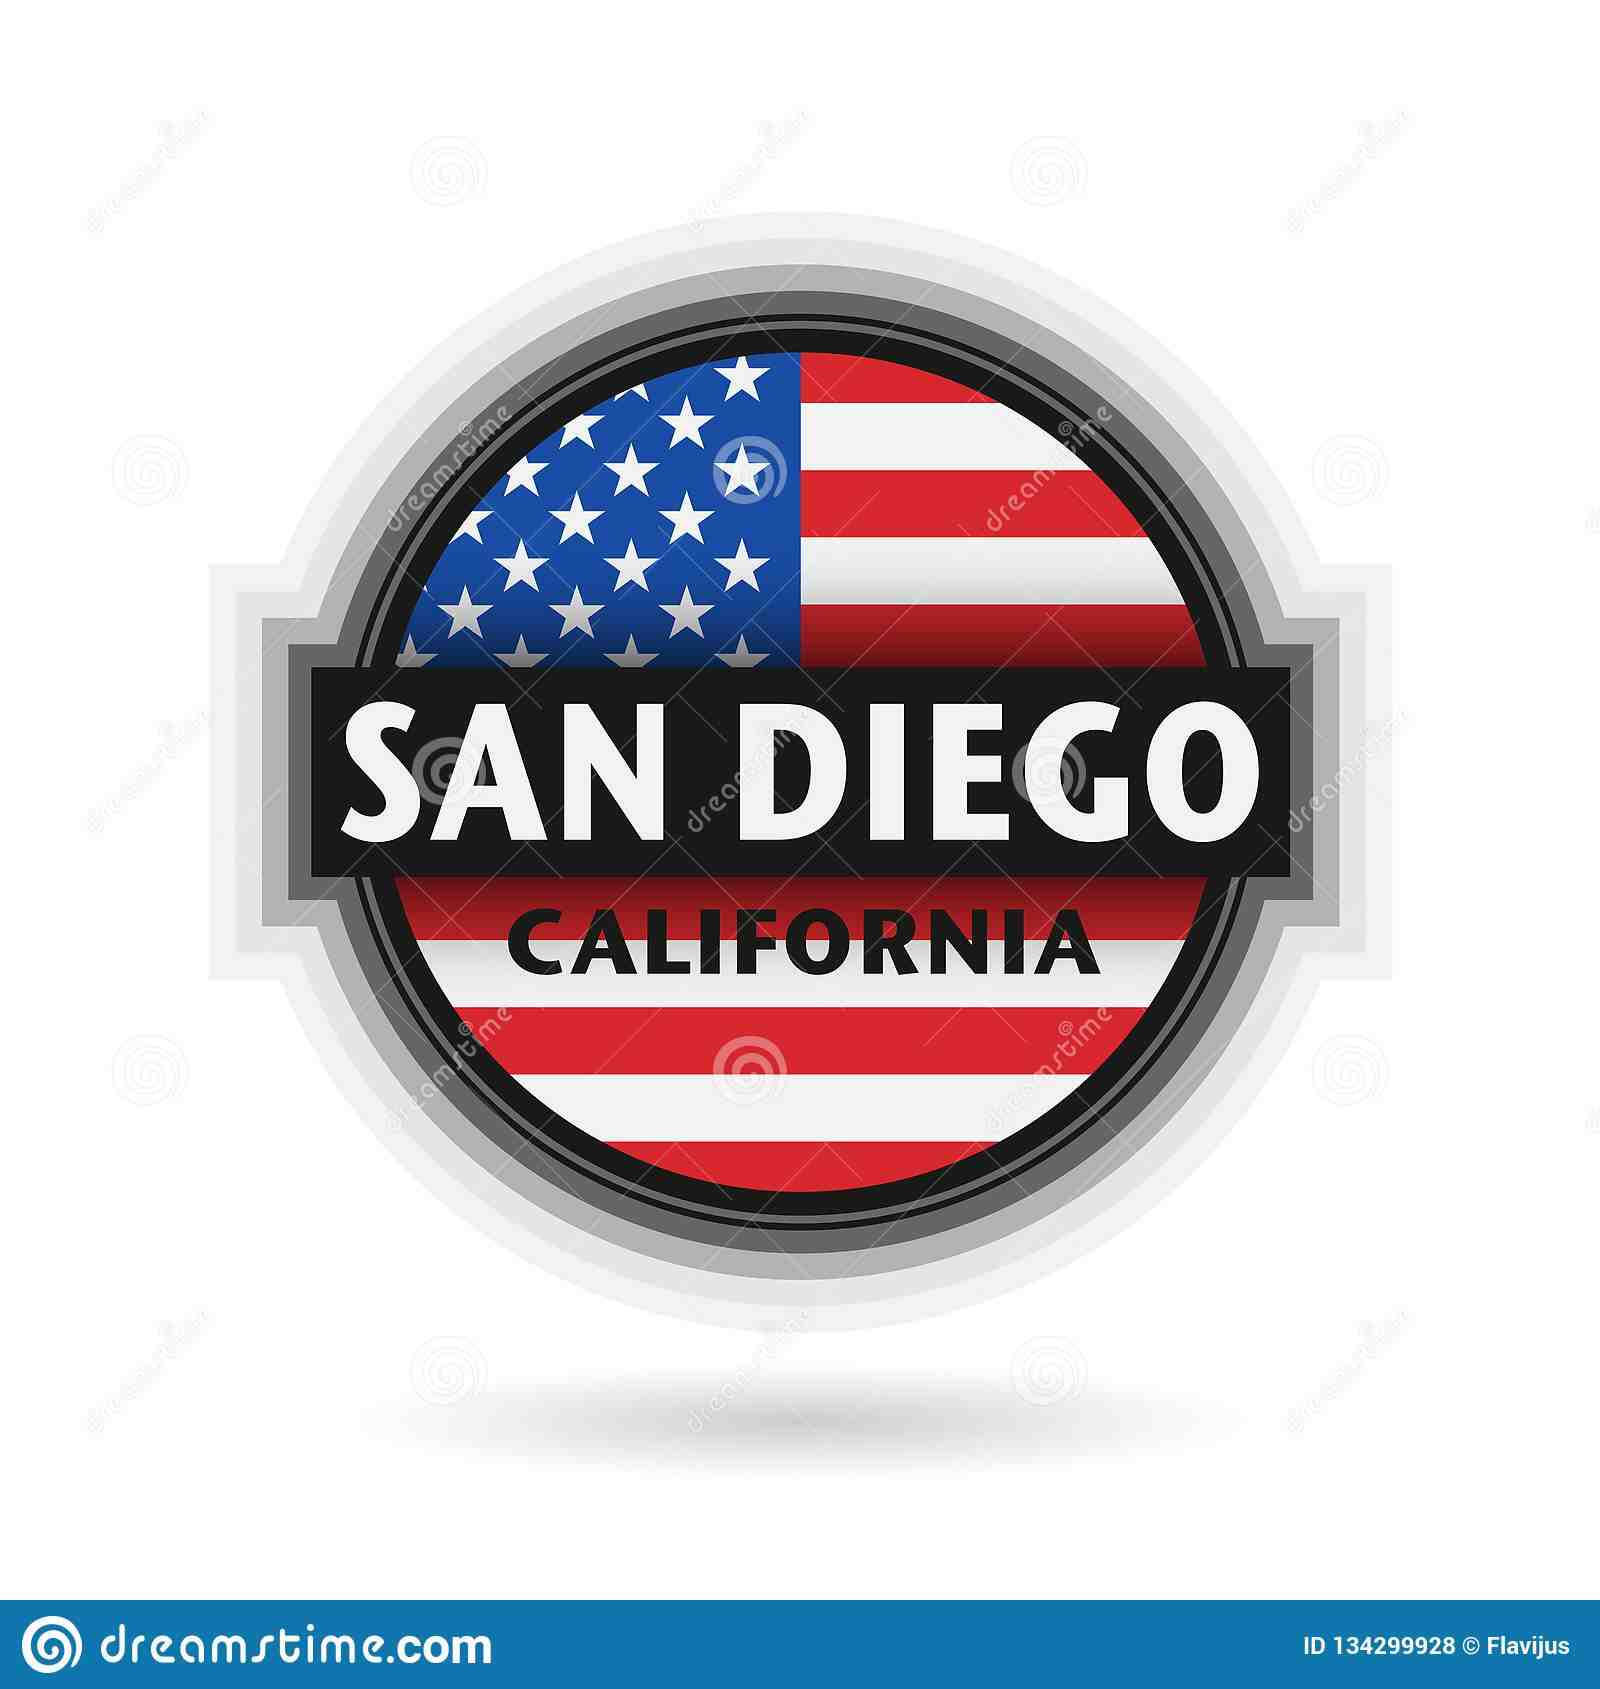 What is the nickname of San Diego?